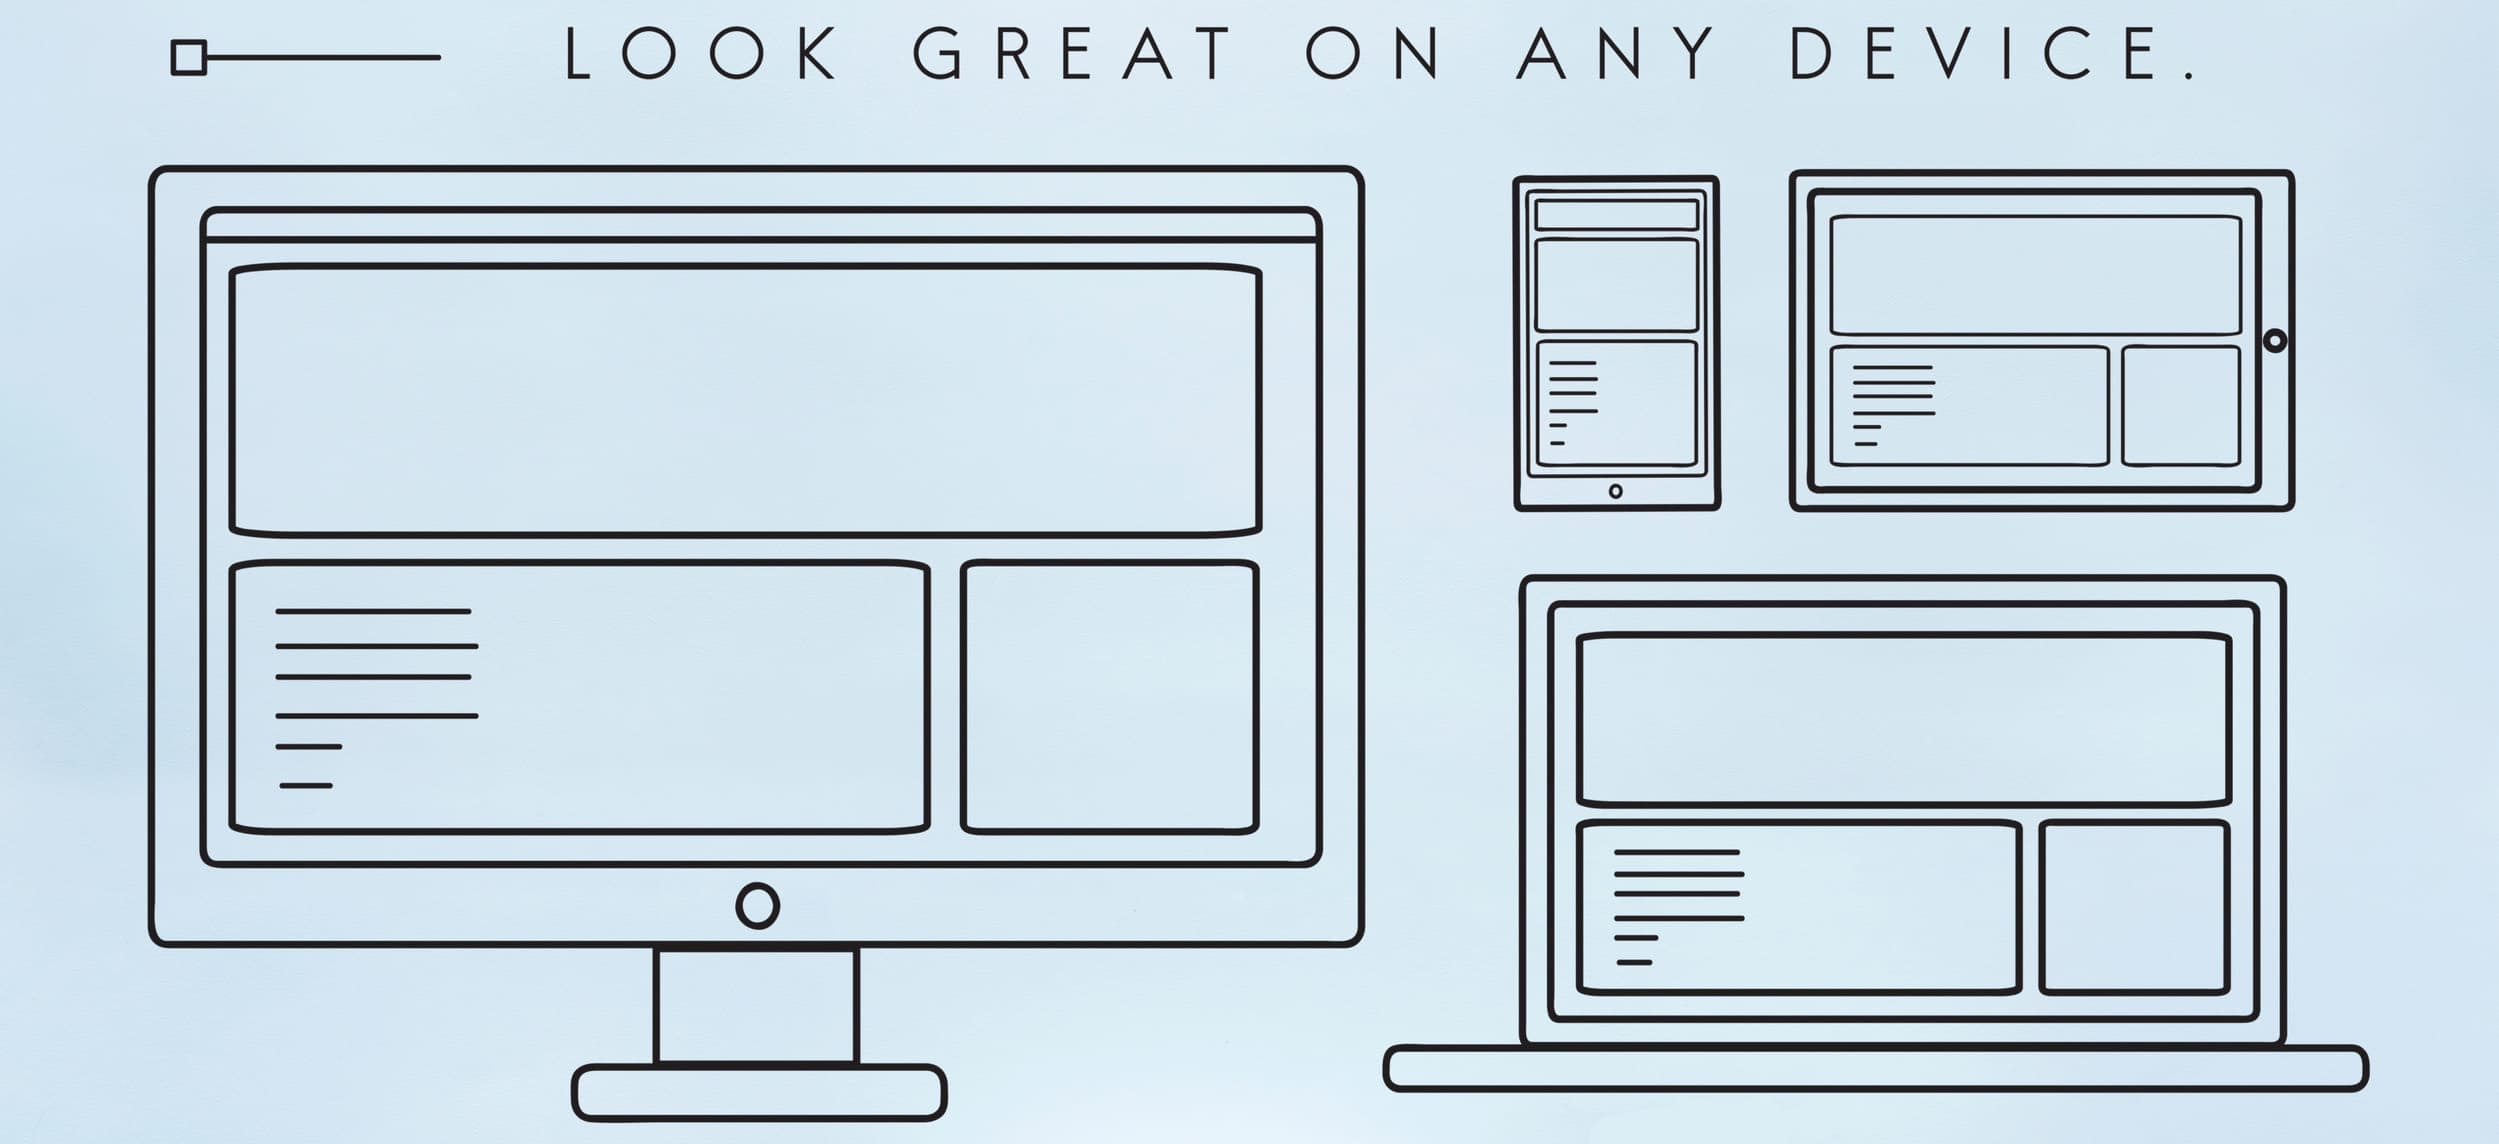 Responsive Design - Look Great On Any Device